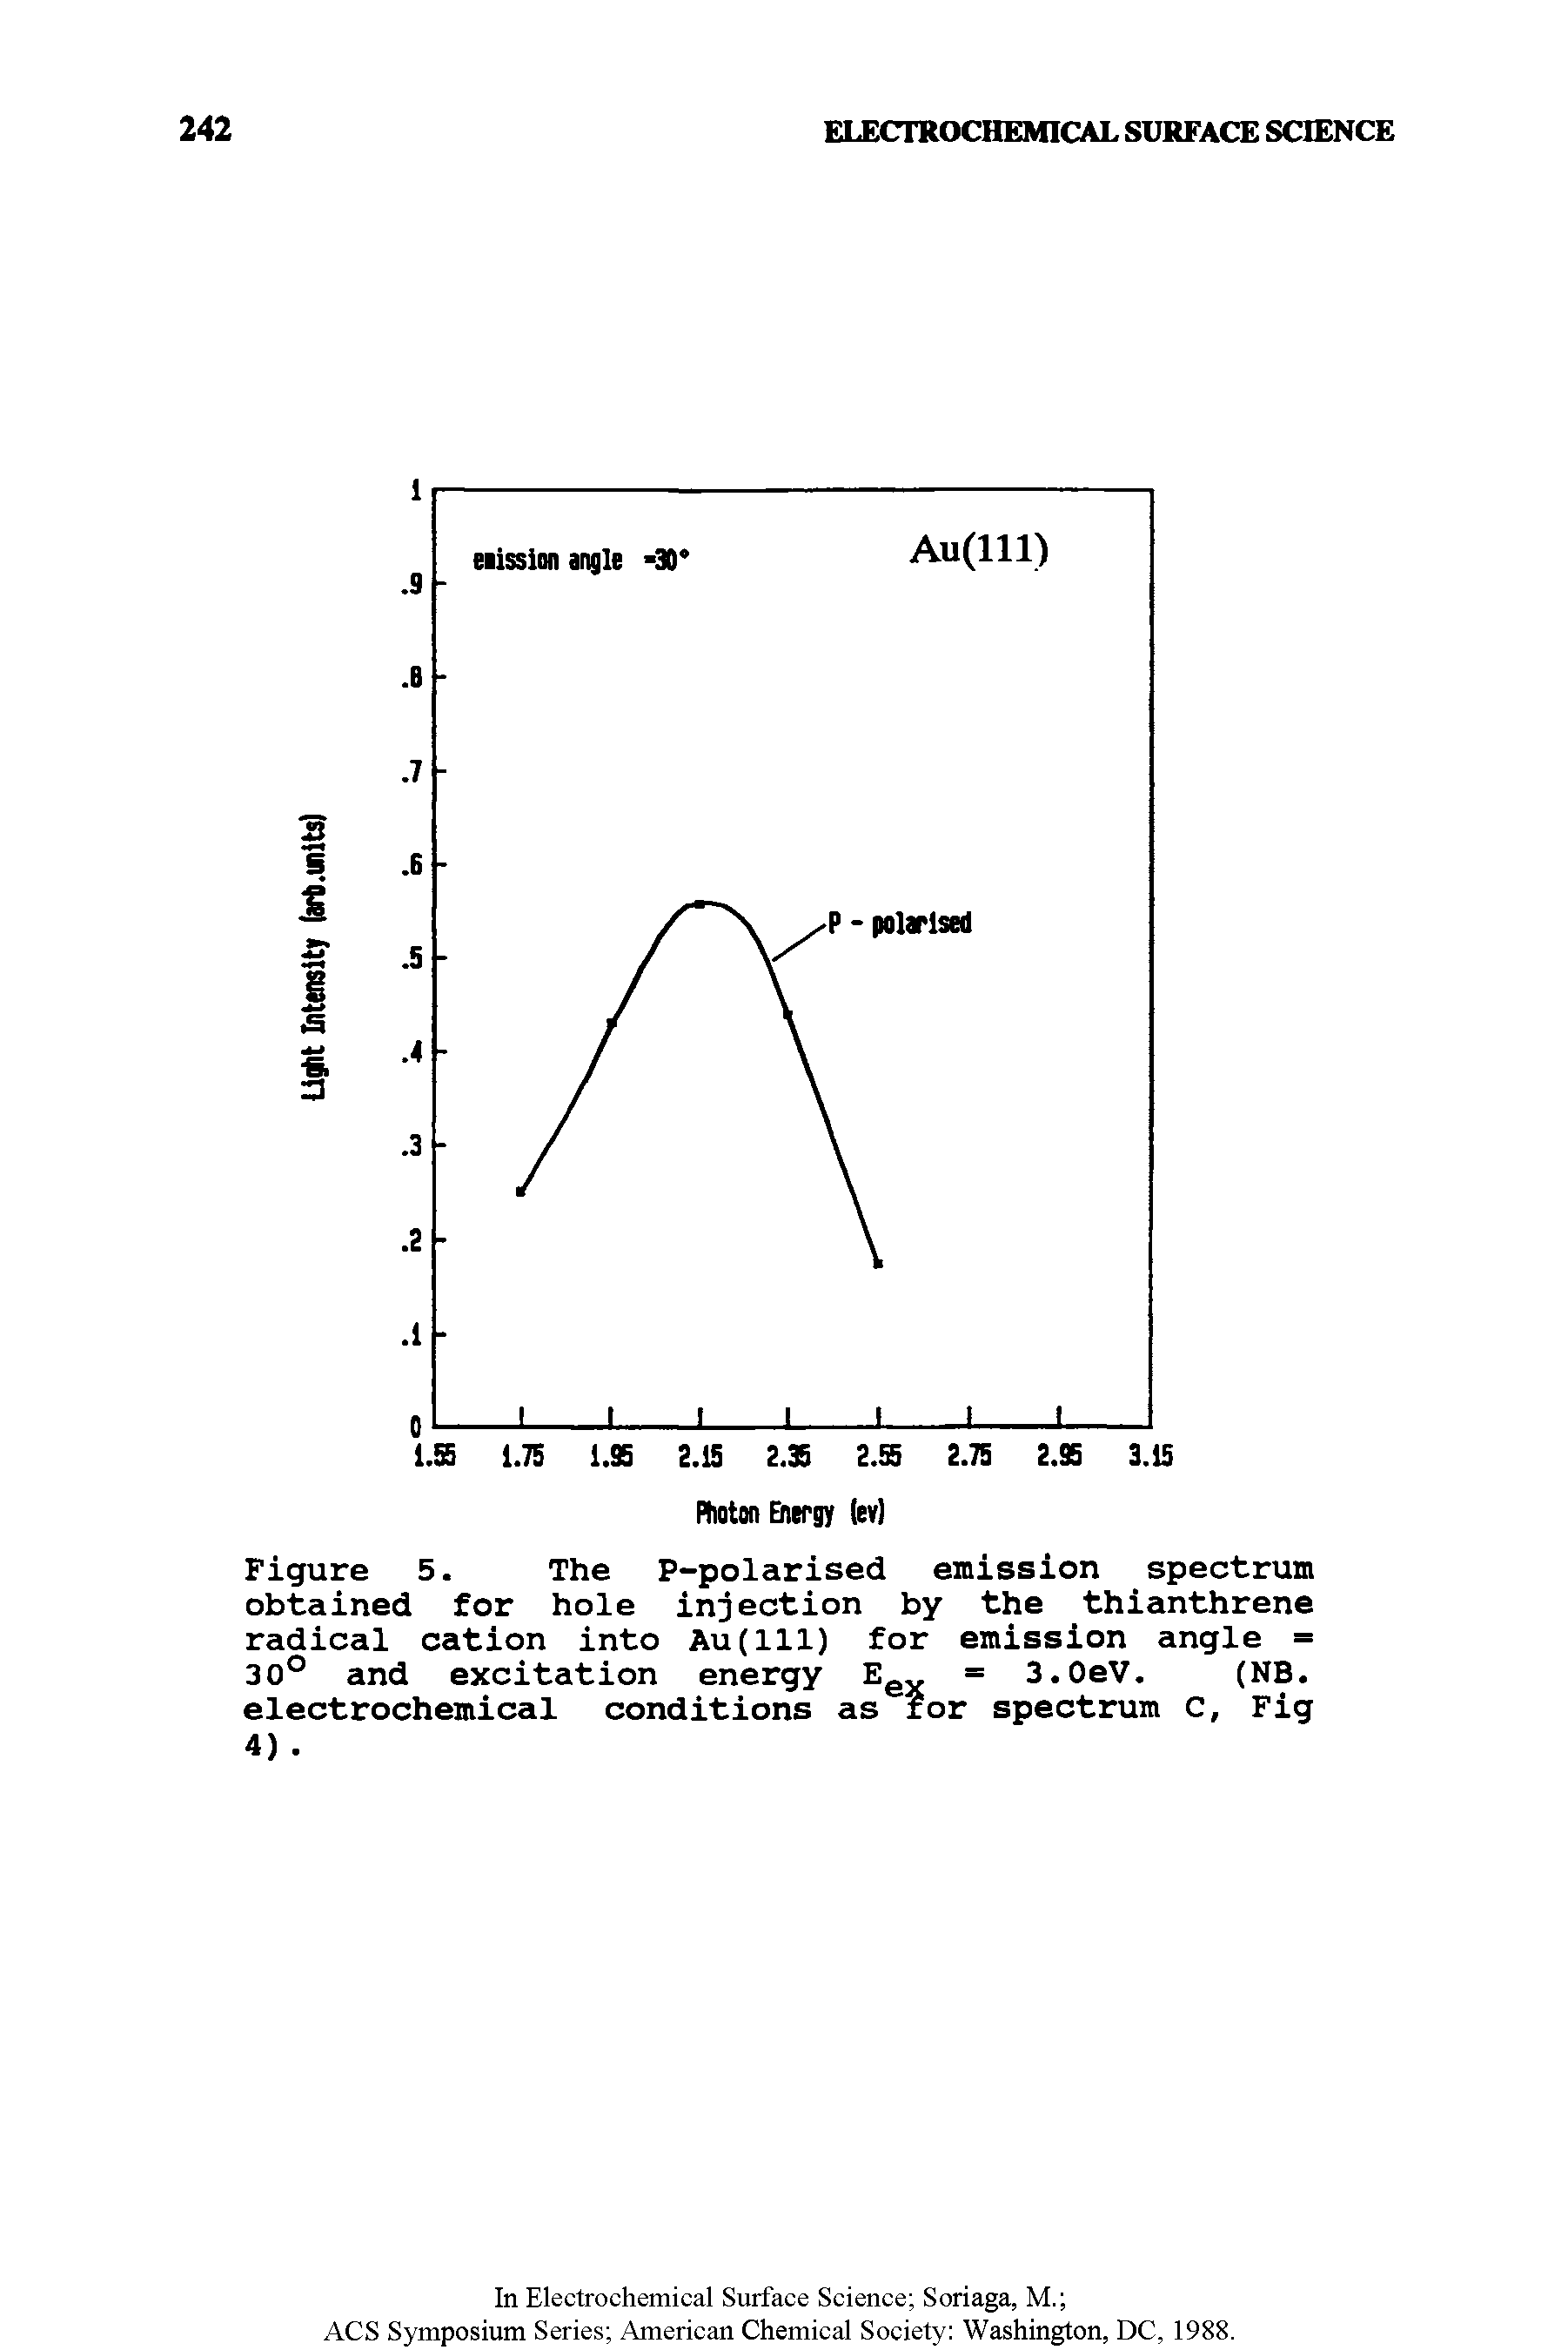 Figure 5. The P-polarised emission spectrum obtained for hole injection by the thianthrene radical cation into Au(lll) for emission angle = 30° and excitation energy Eex = 3.0eV. (NB.